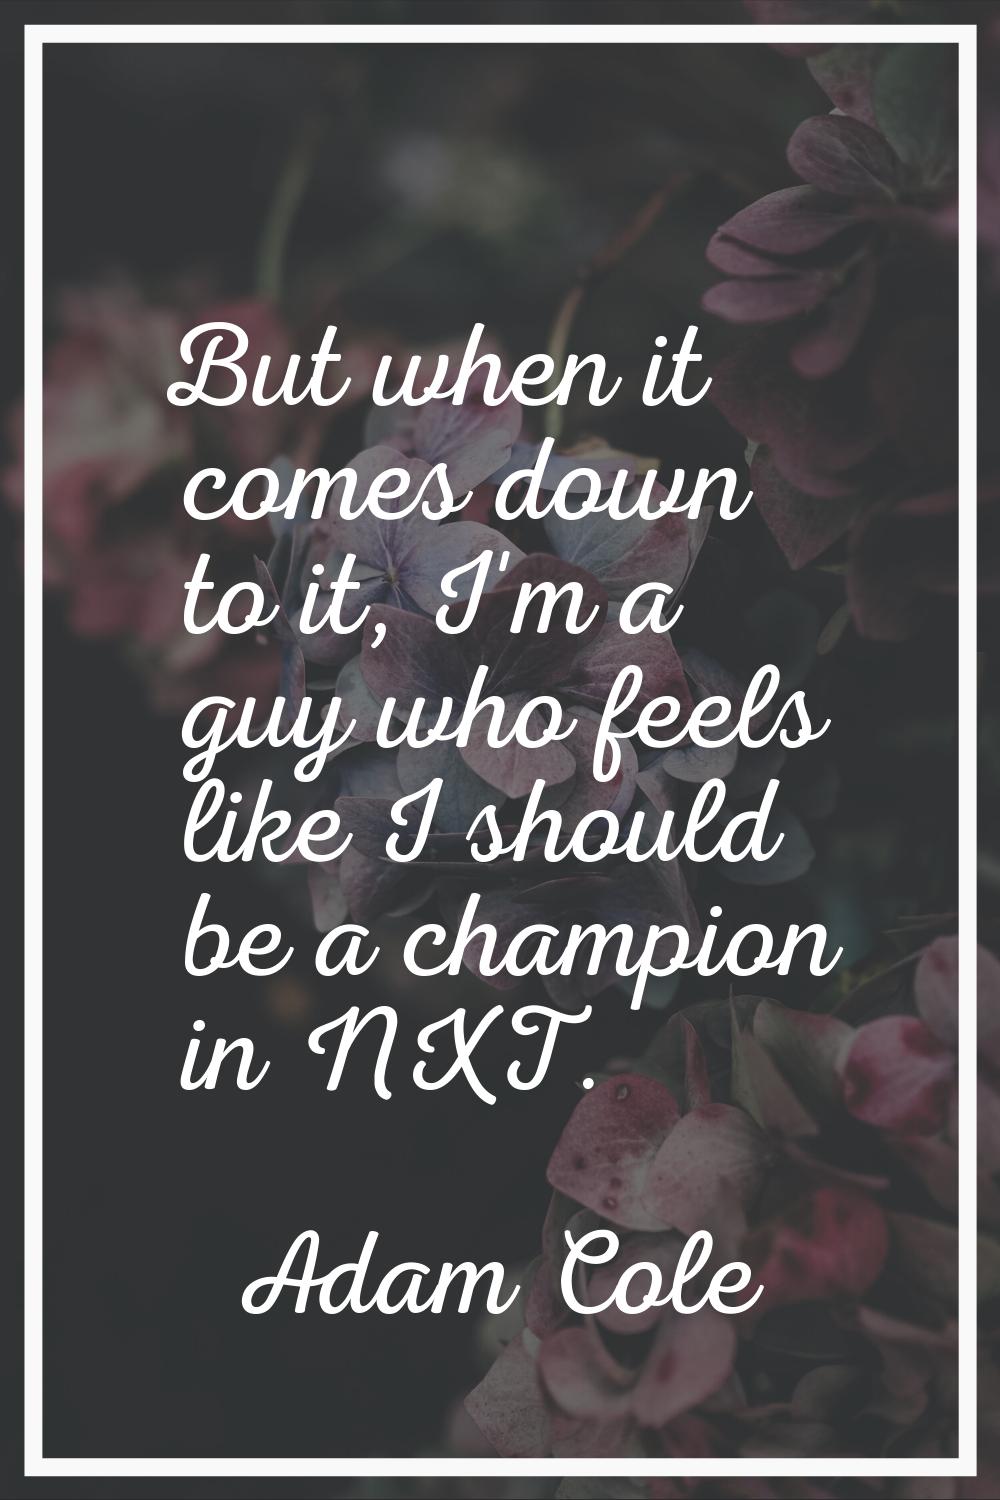 But when it comes down to it, I'm a guy who feels like I should be a champion in NXT.